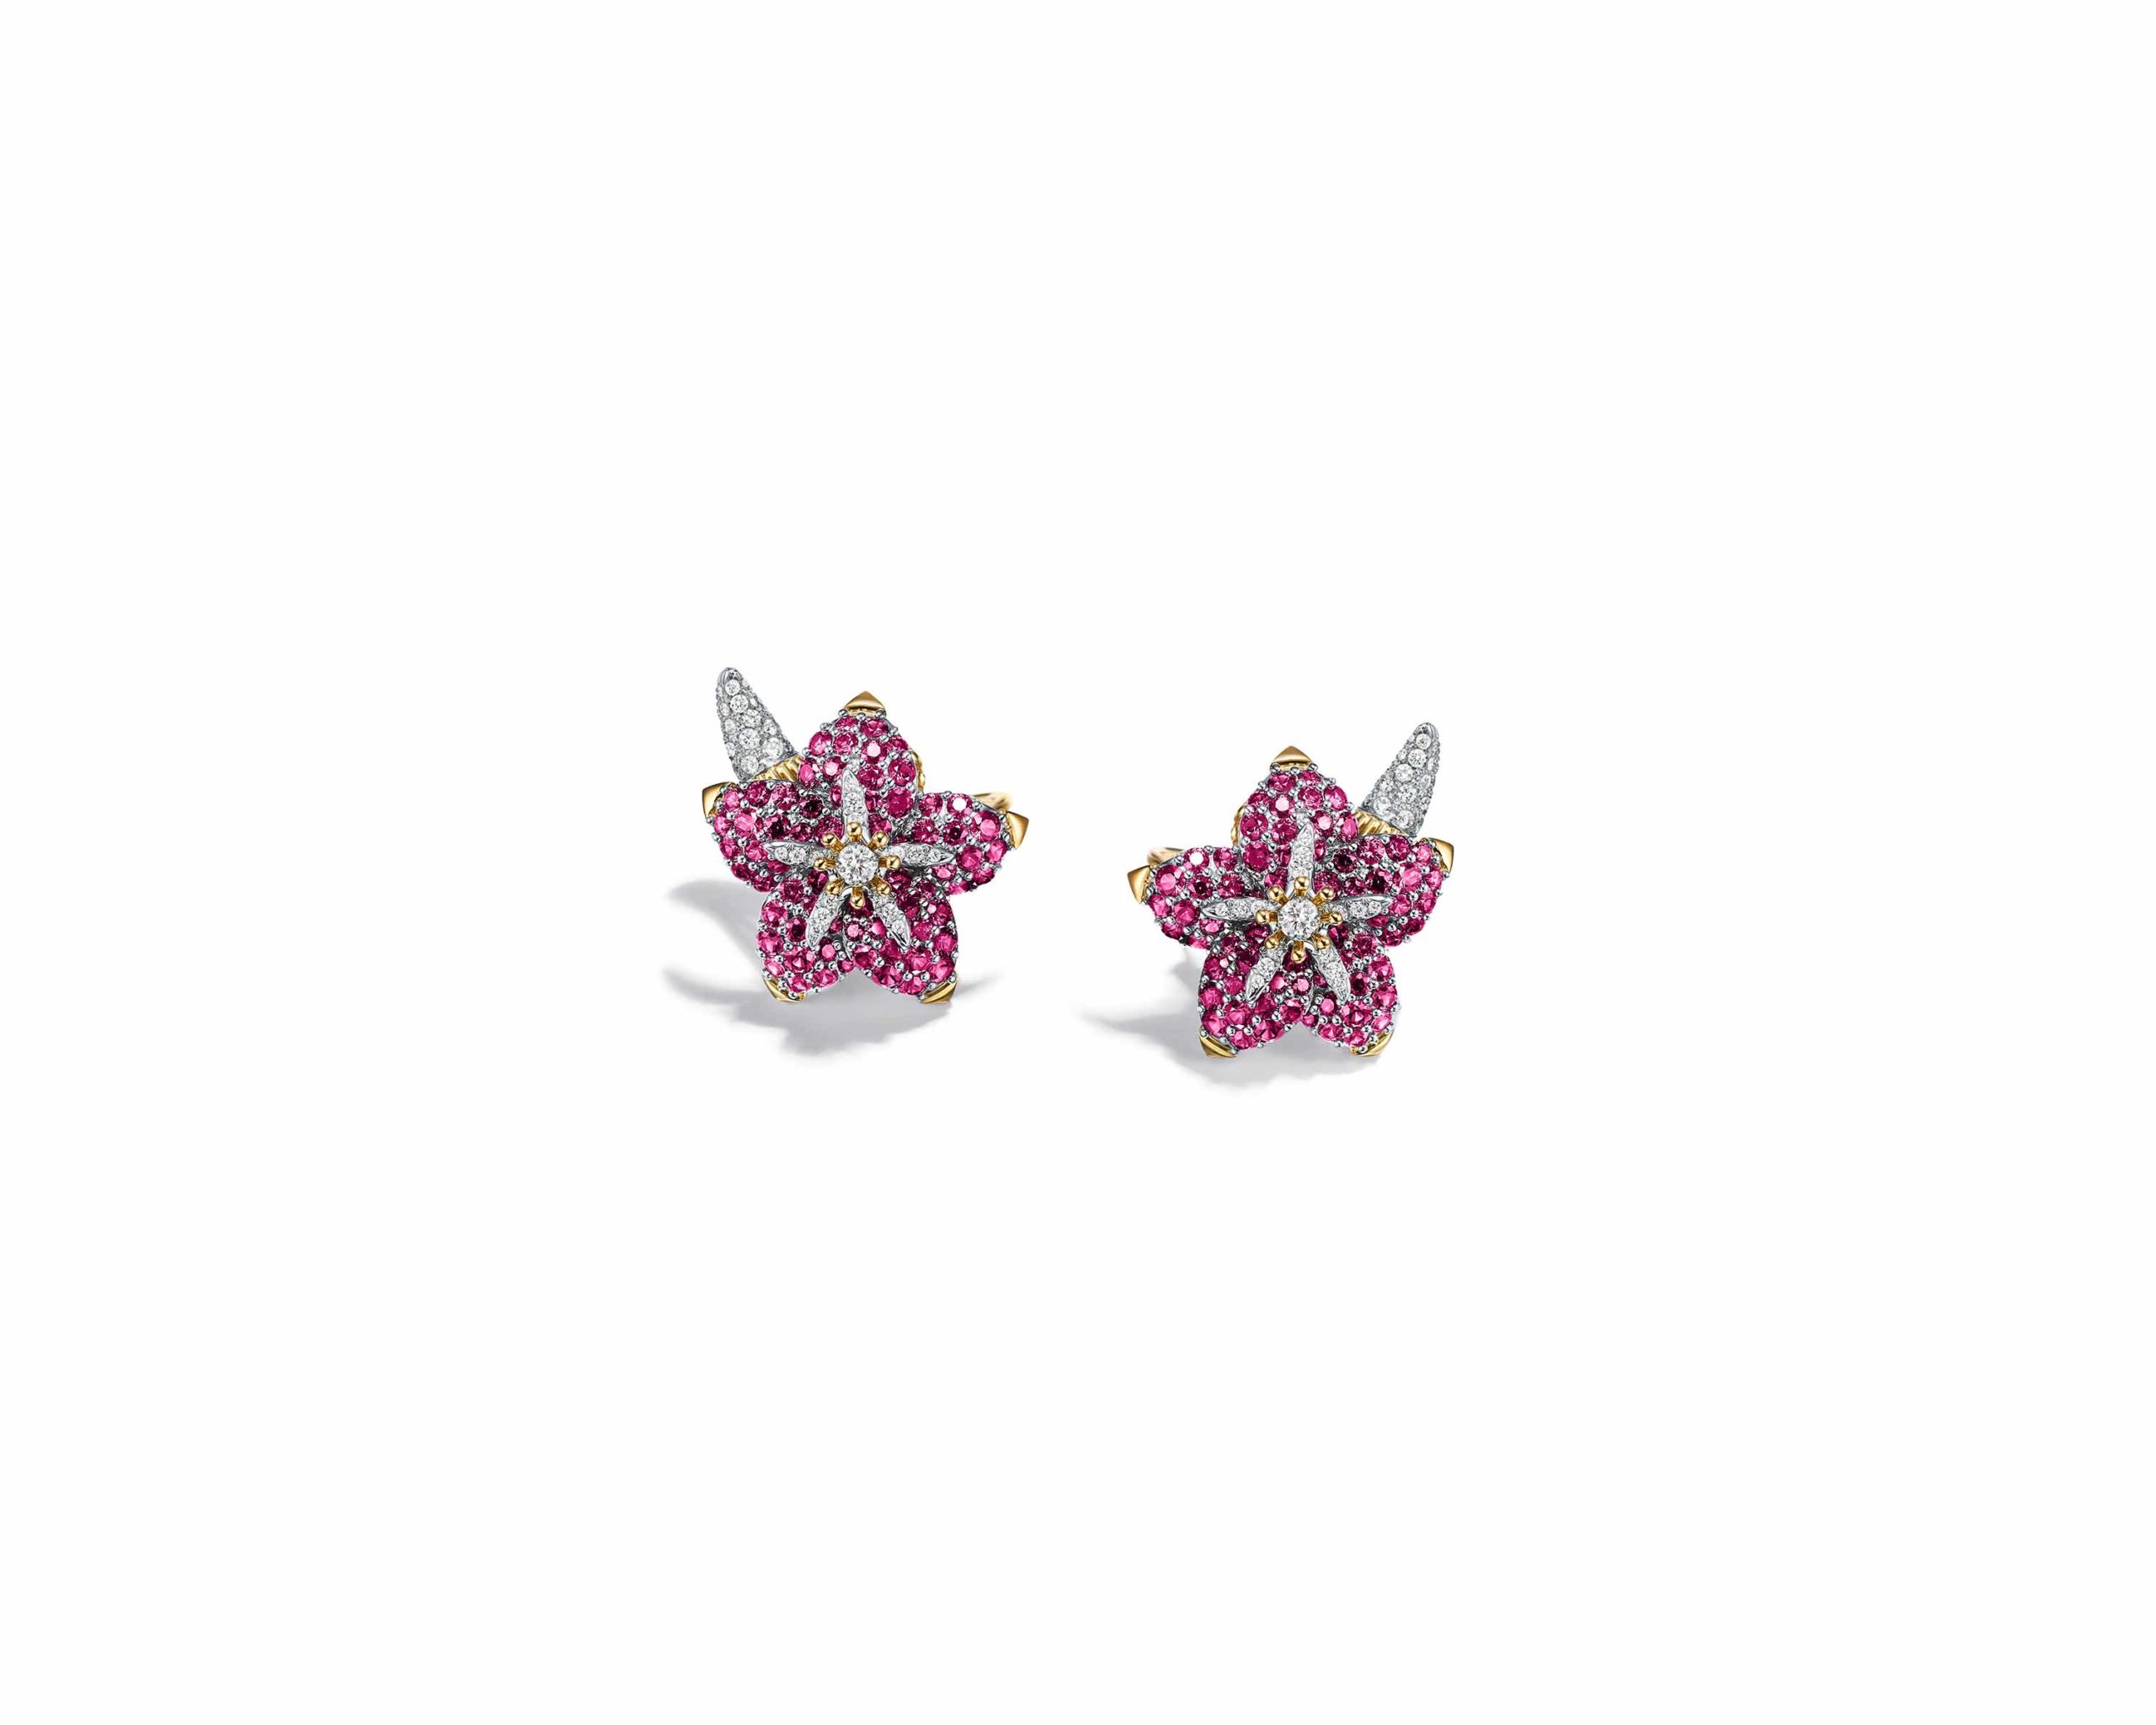 Tiffany & Co. Schlumberger® Morning Glory earrings in platinum and 18k  yellow gold with pink sapphires and round brilliant diamonds - Tiffany